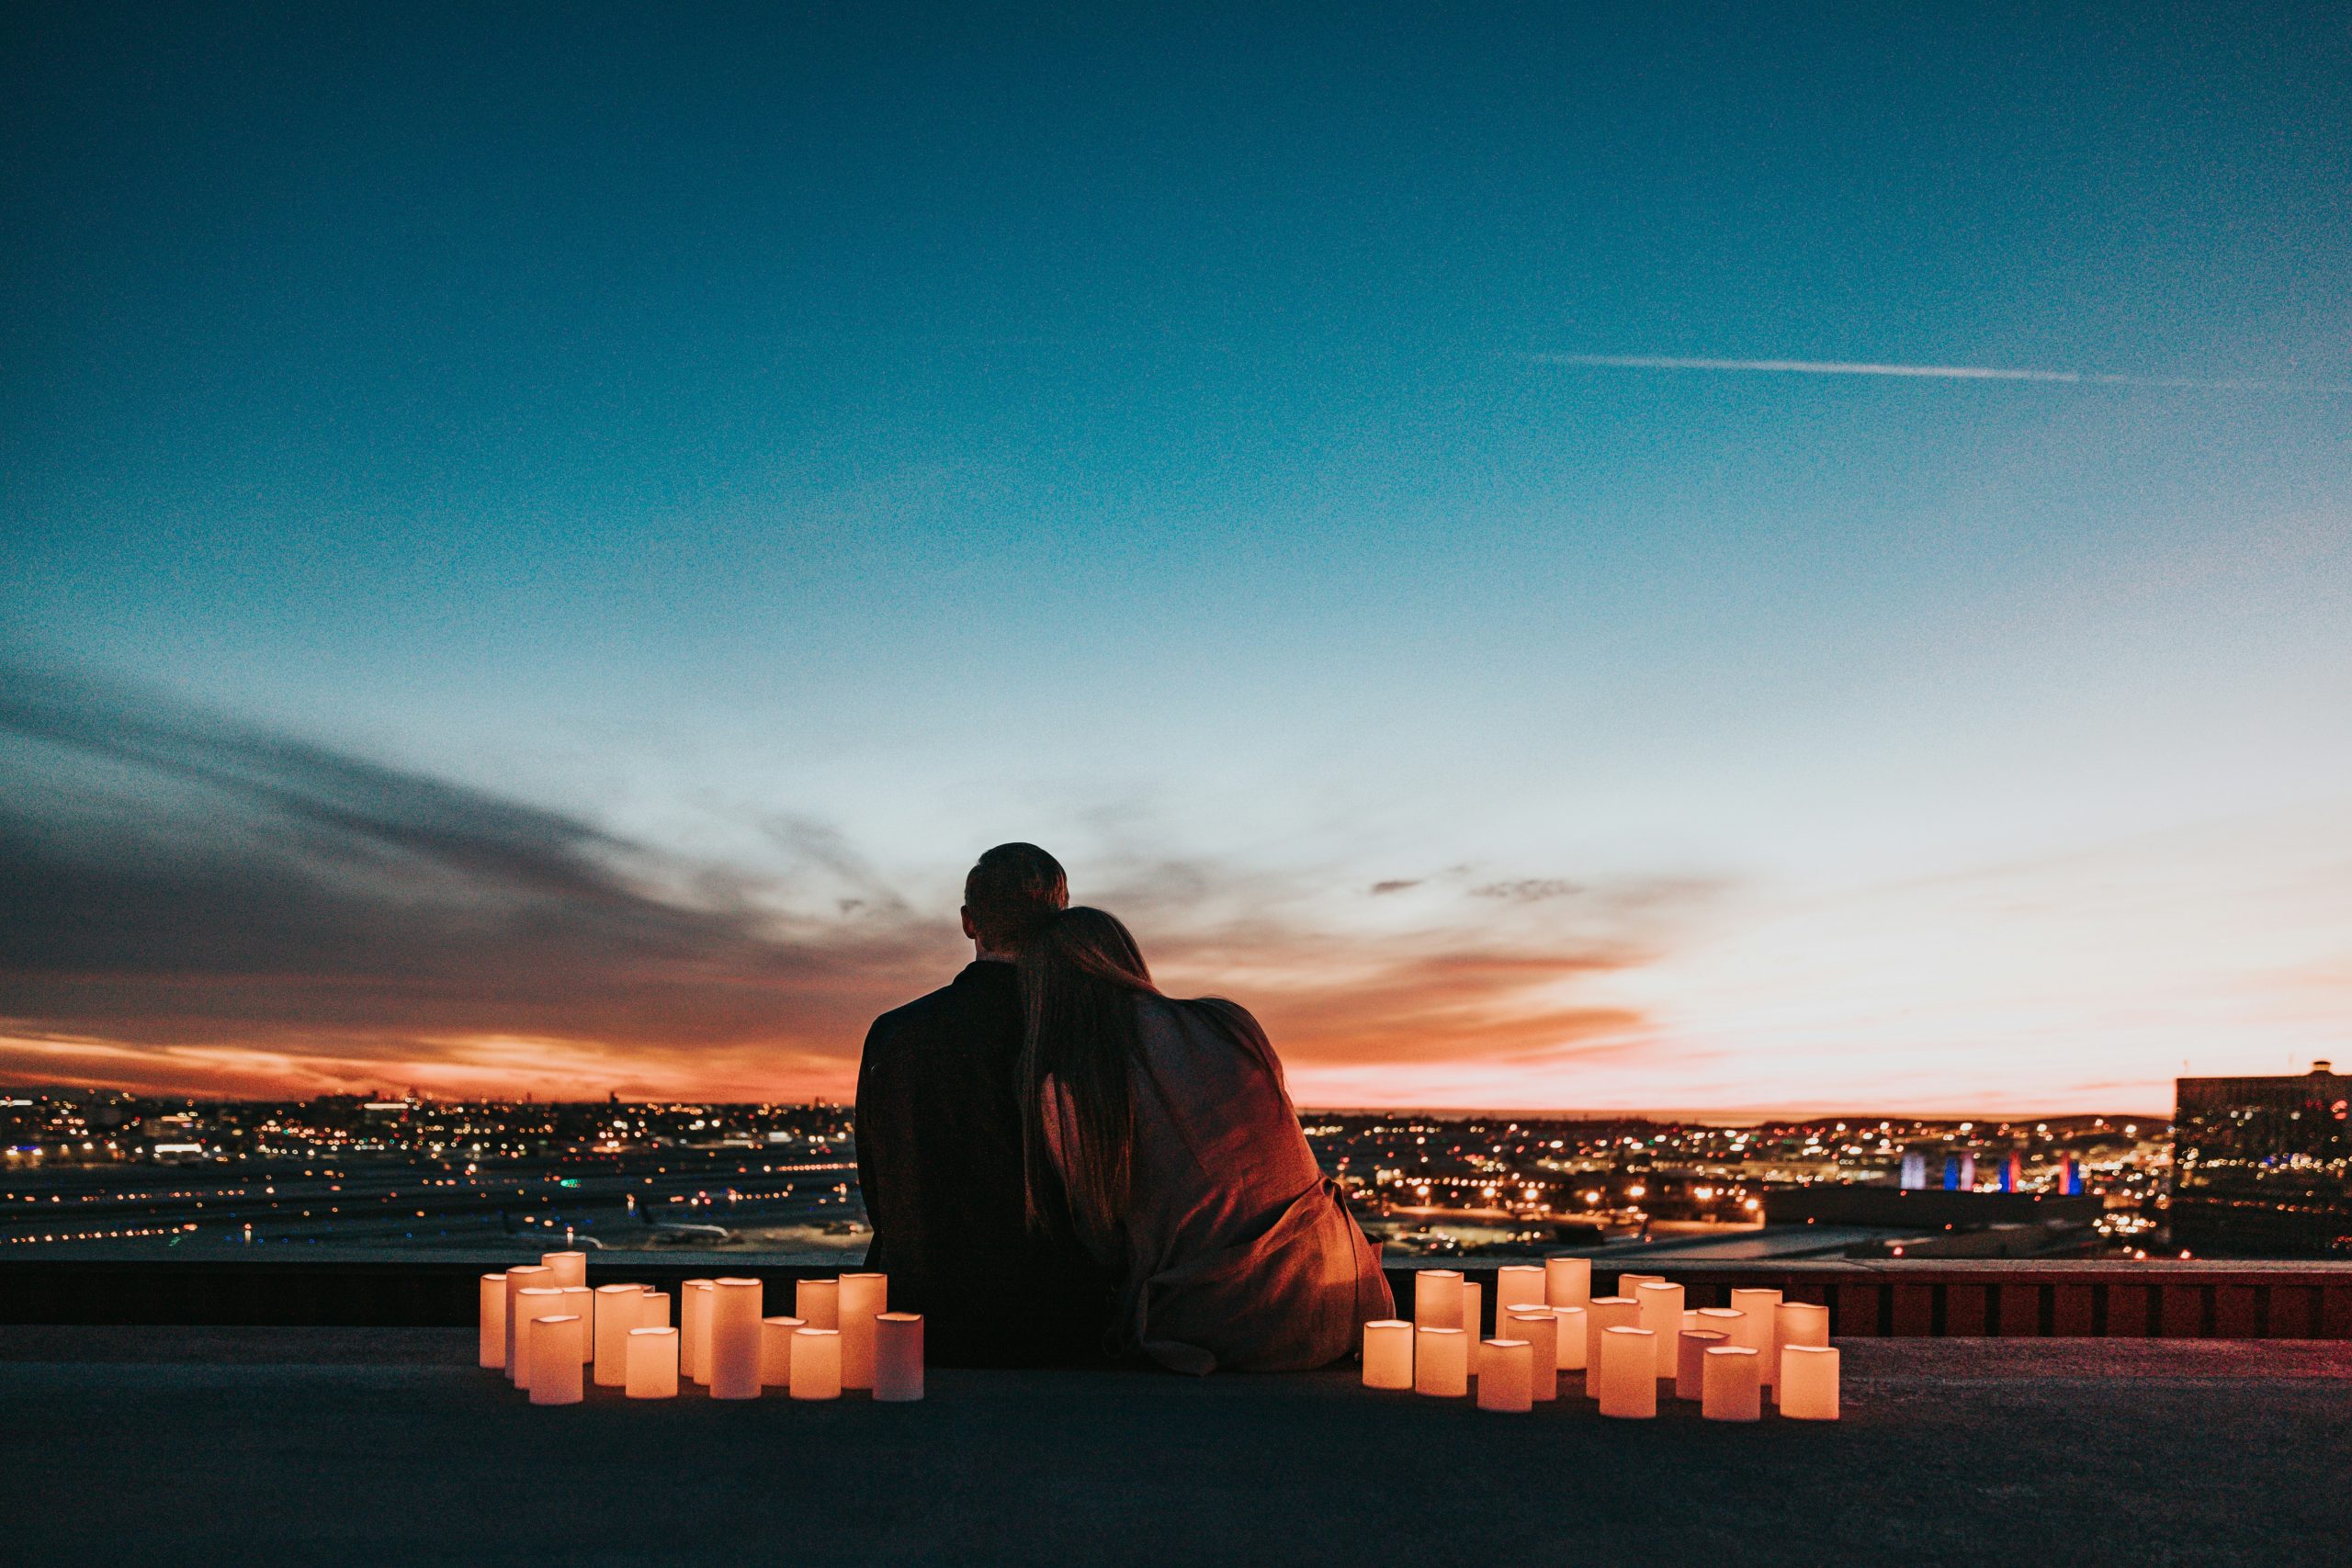 Couple sitting on rooftop overlooking city at night